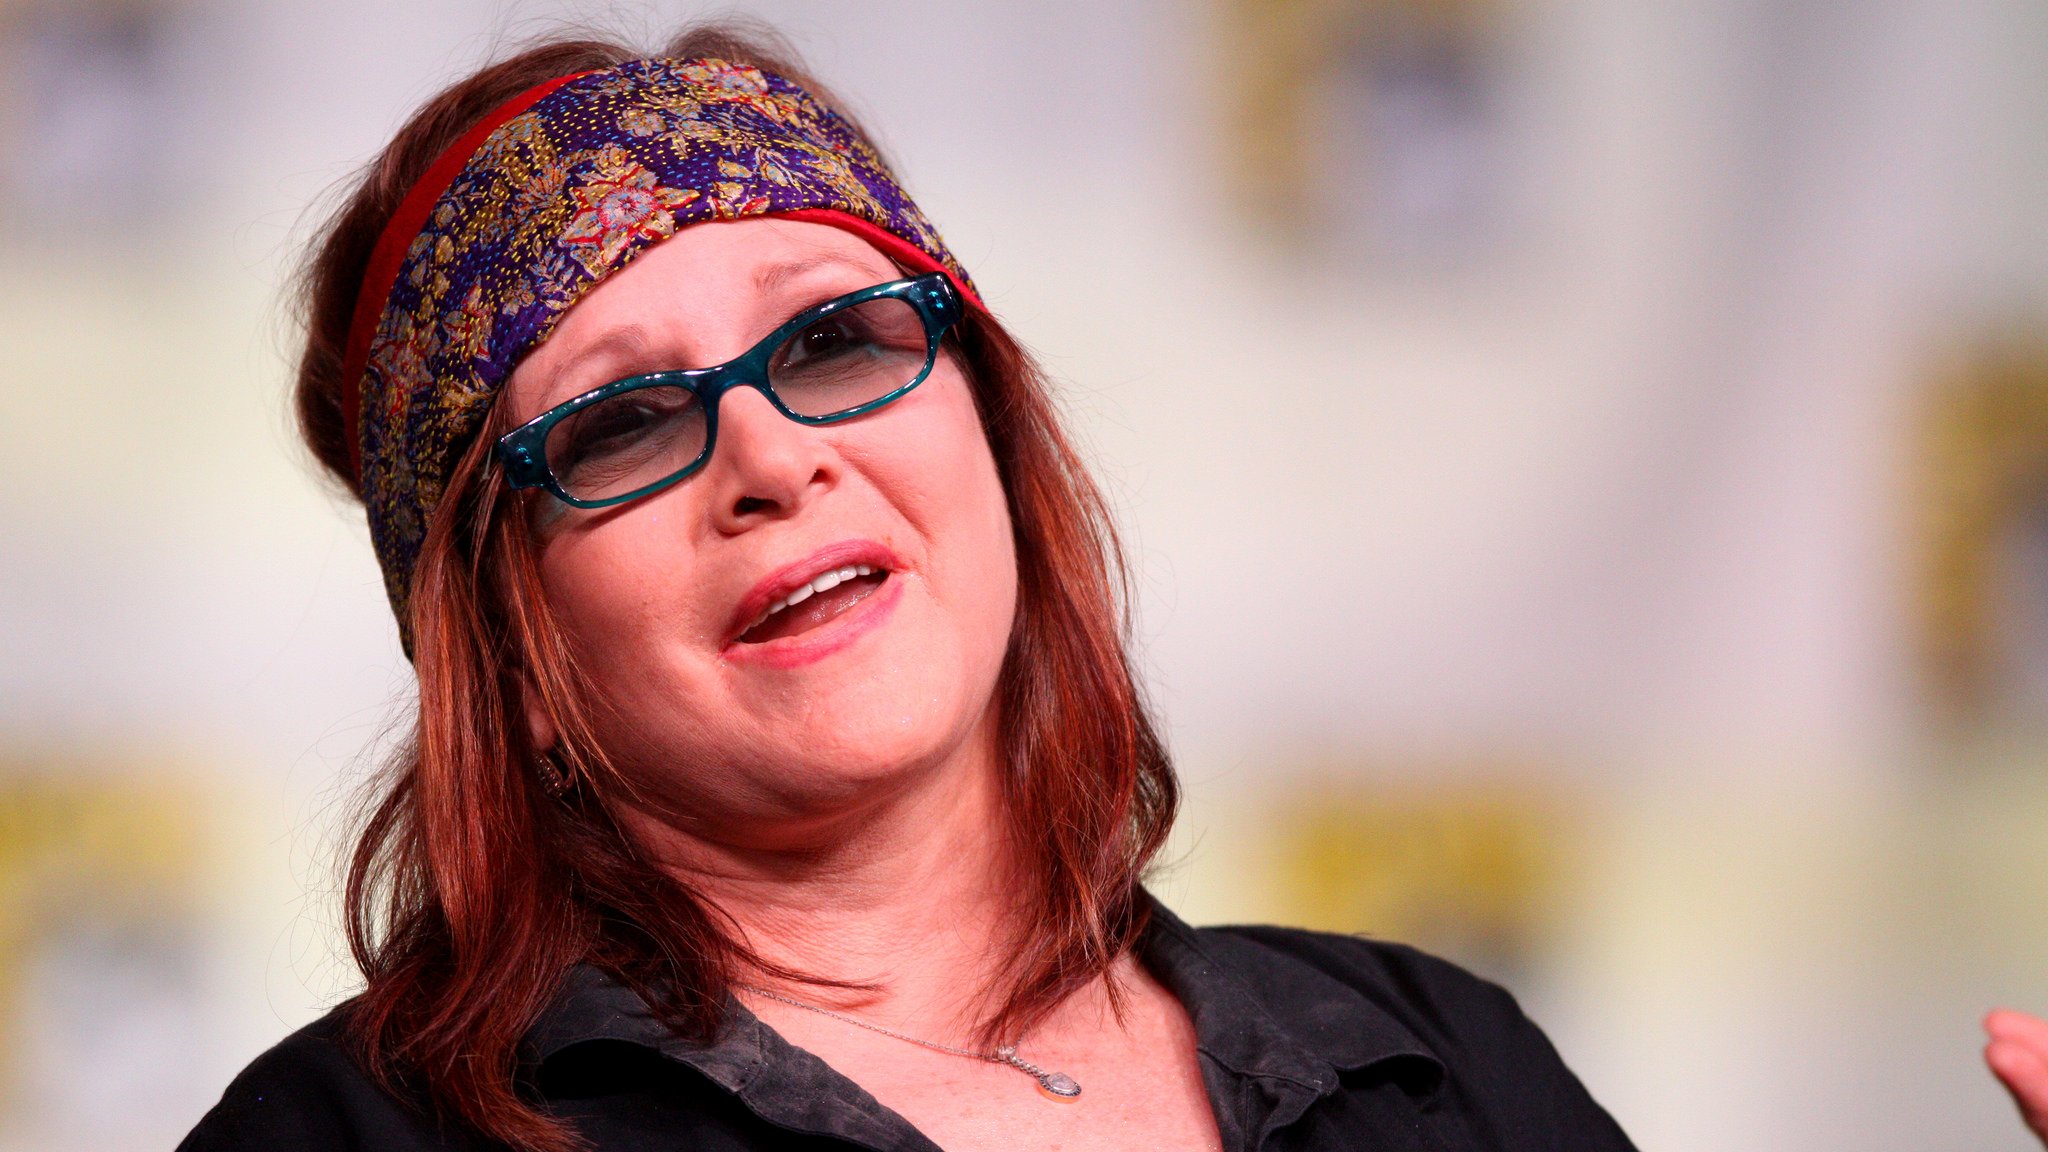 Carrie Fisher speaking at the 2012 San Diego Comic-Con International in San Diego, California. (Gage Skidmore / Flickr)